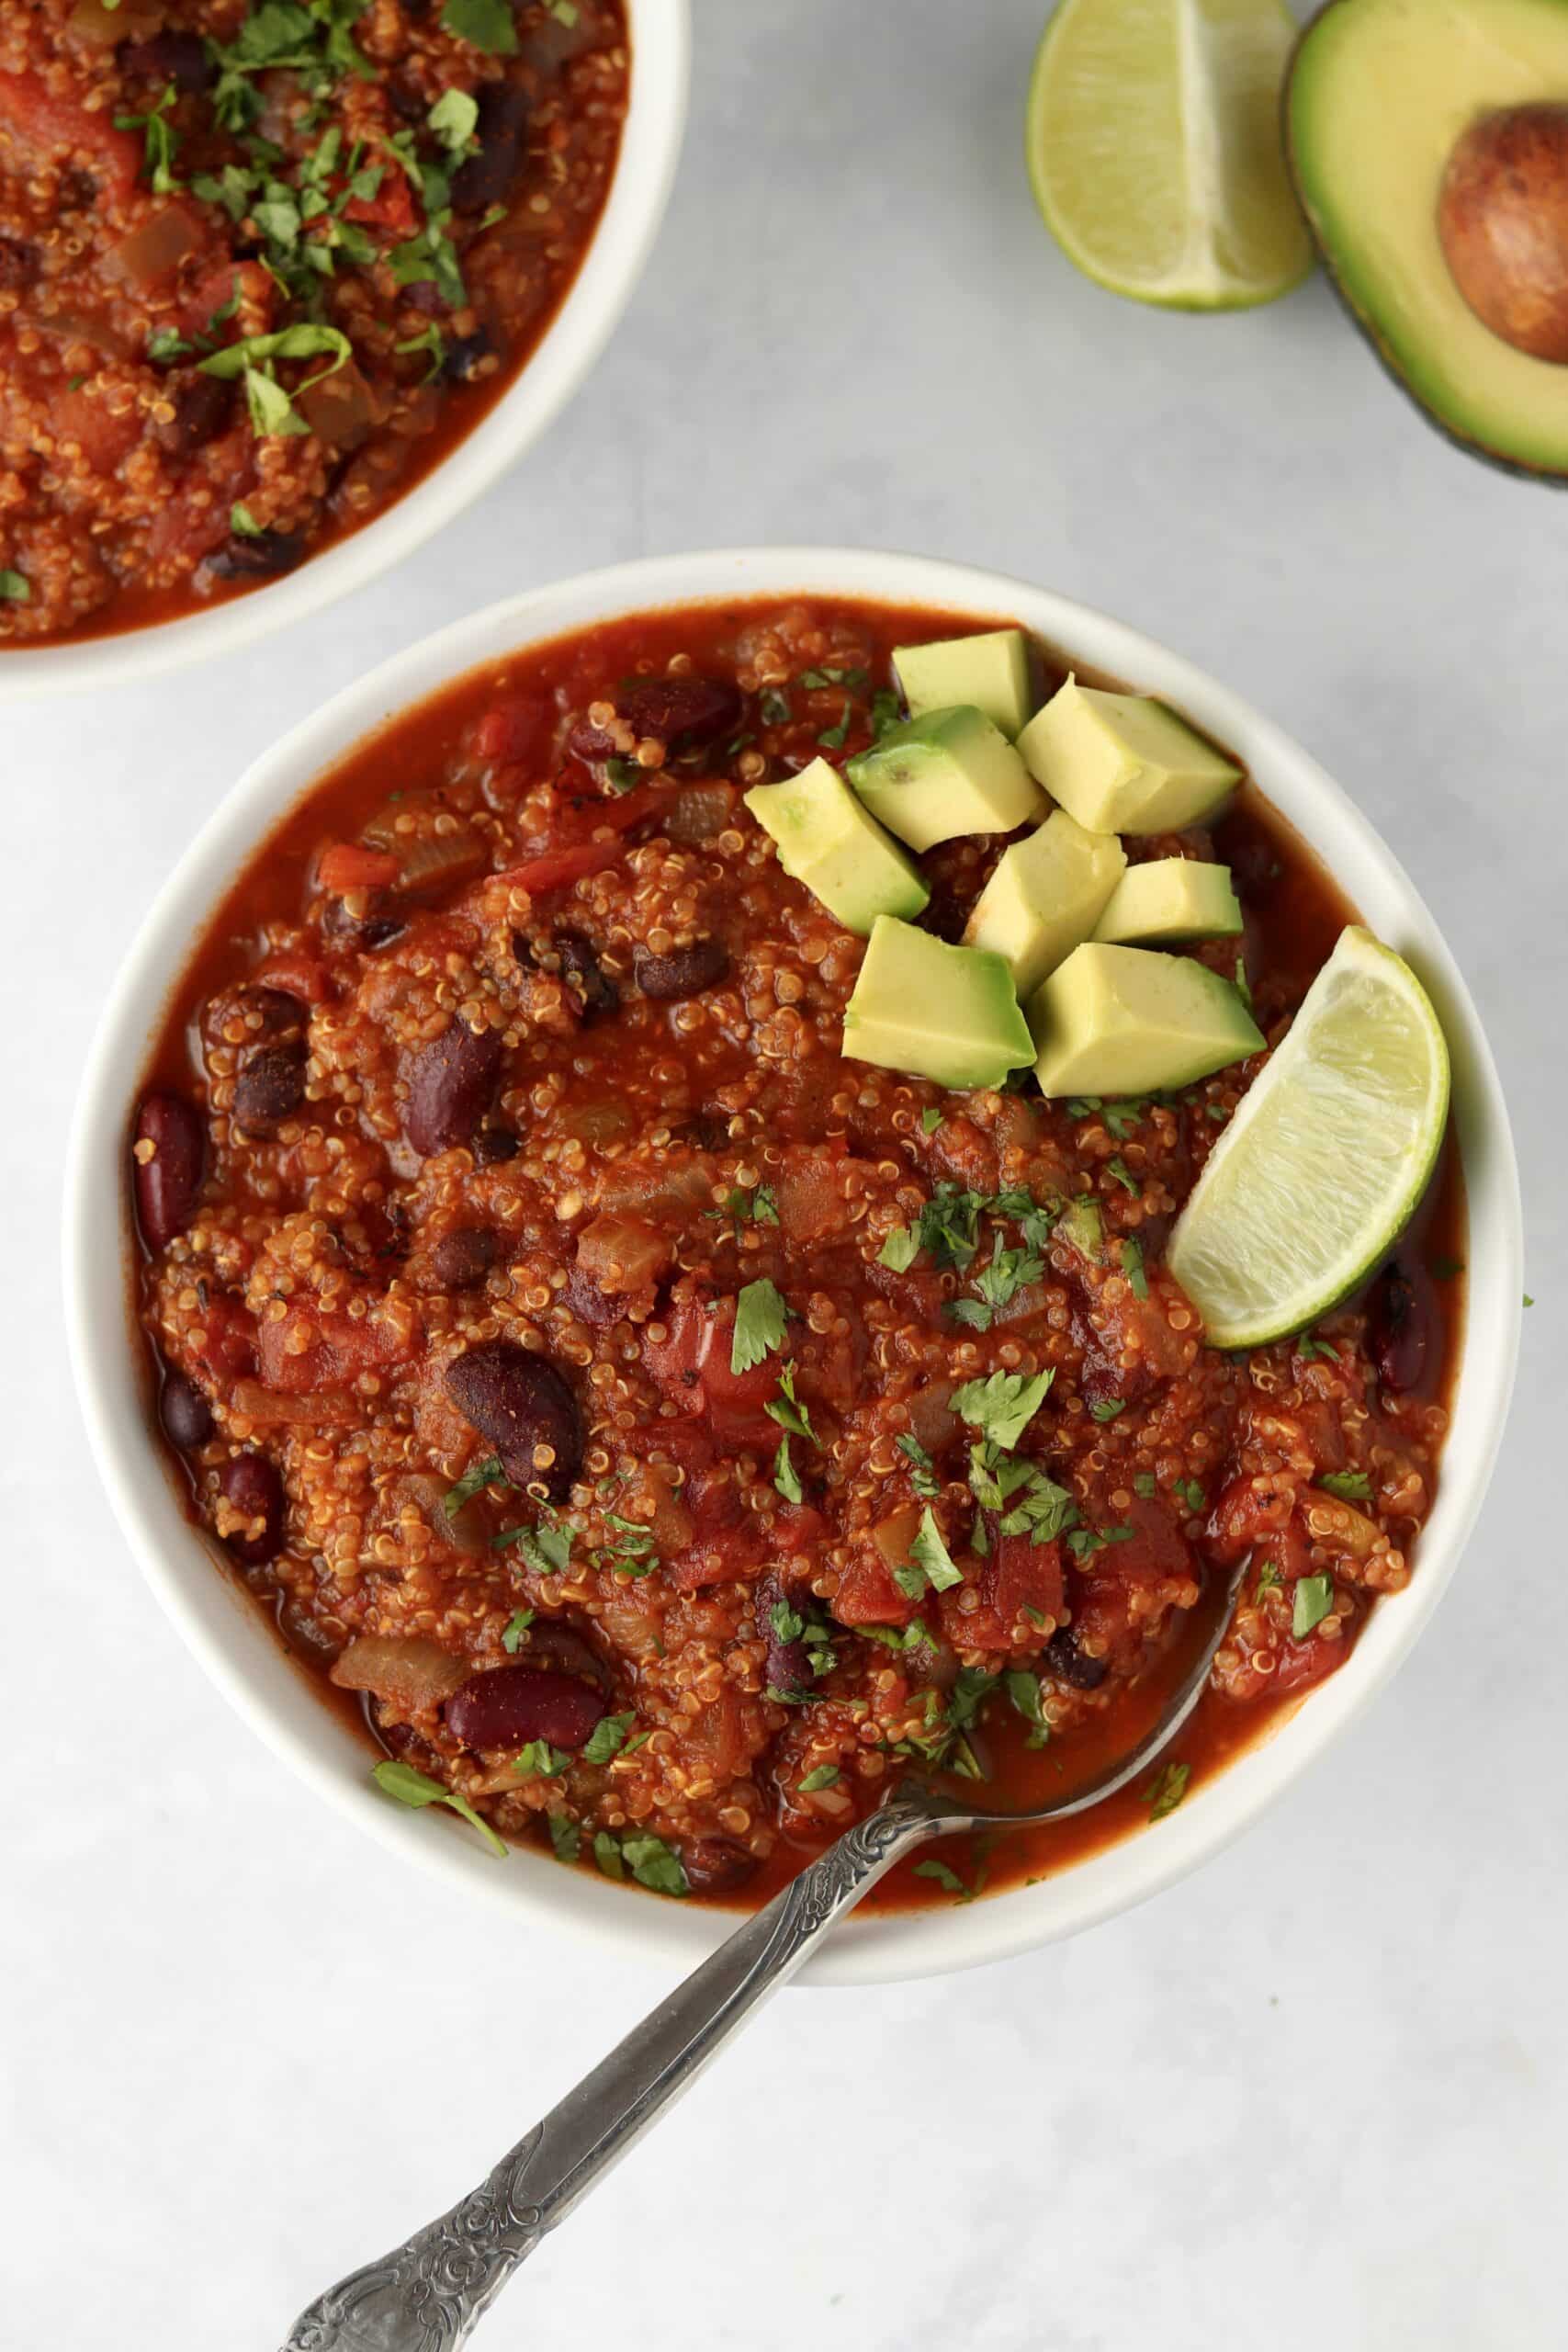 Bowls of vegetarian quinoa chili topped with avocado.